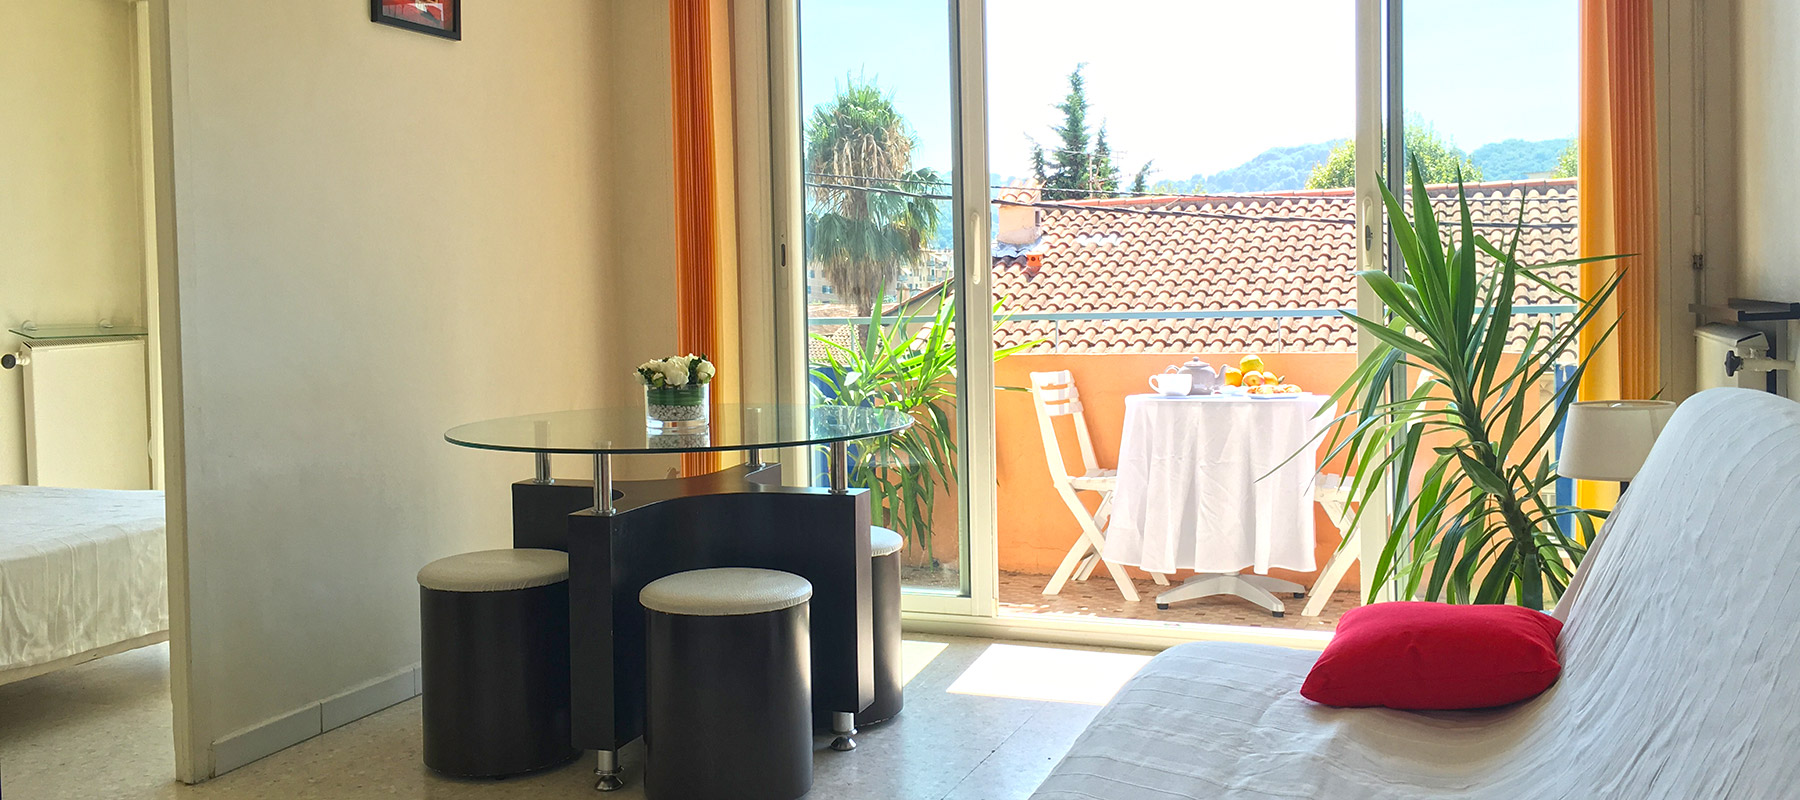 location-appartement-maison-cannes-antibes-vallauris-06-21